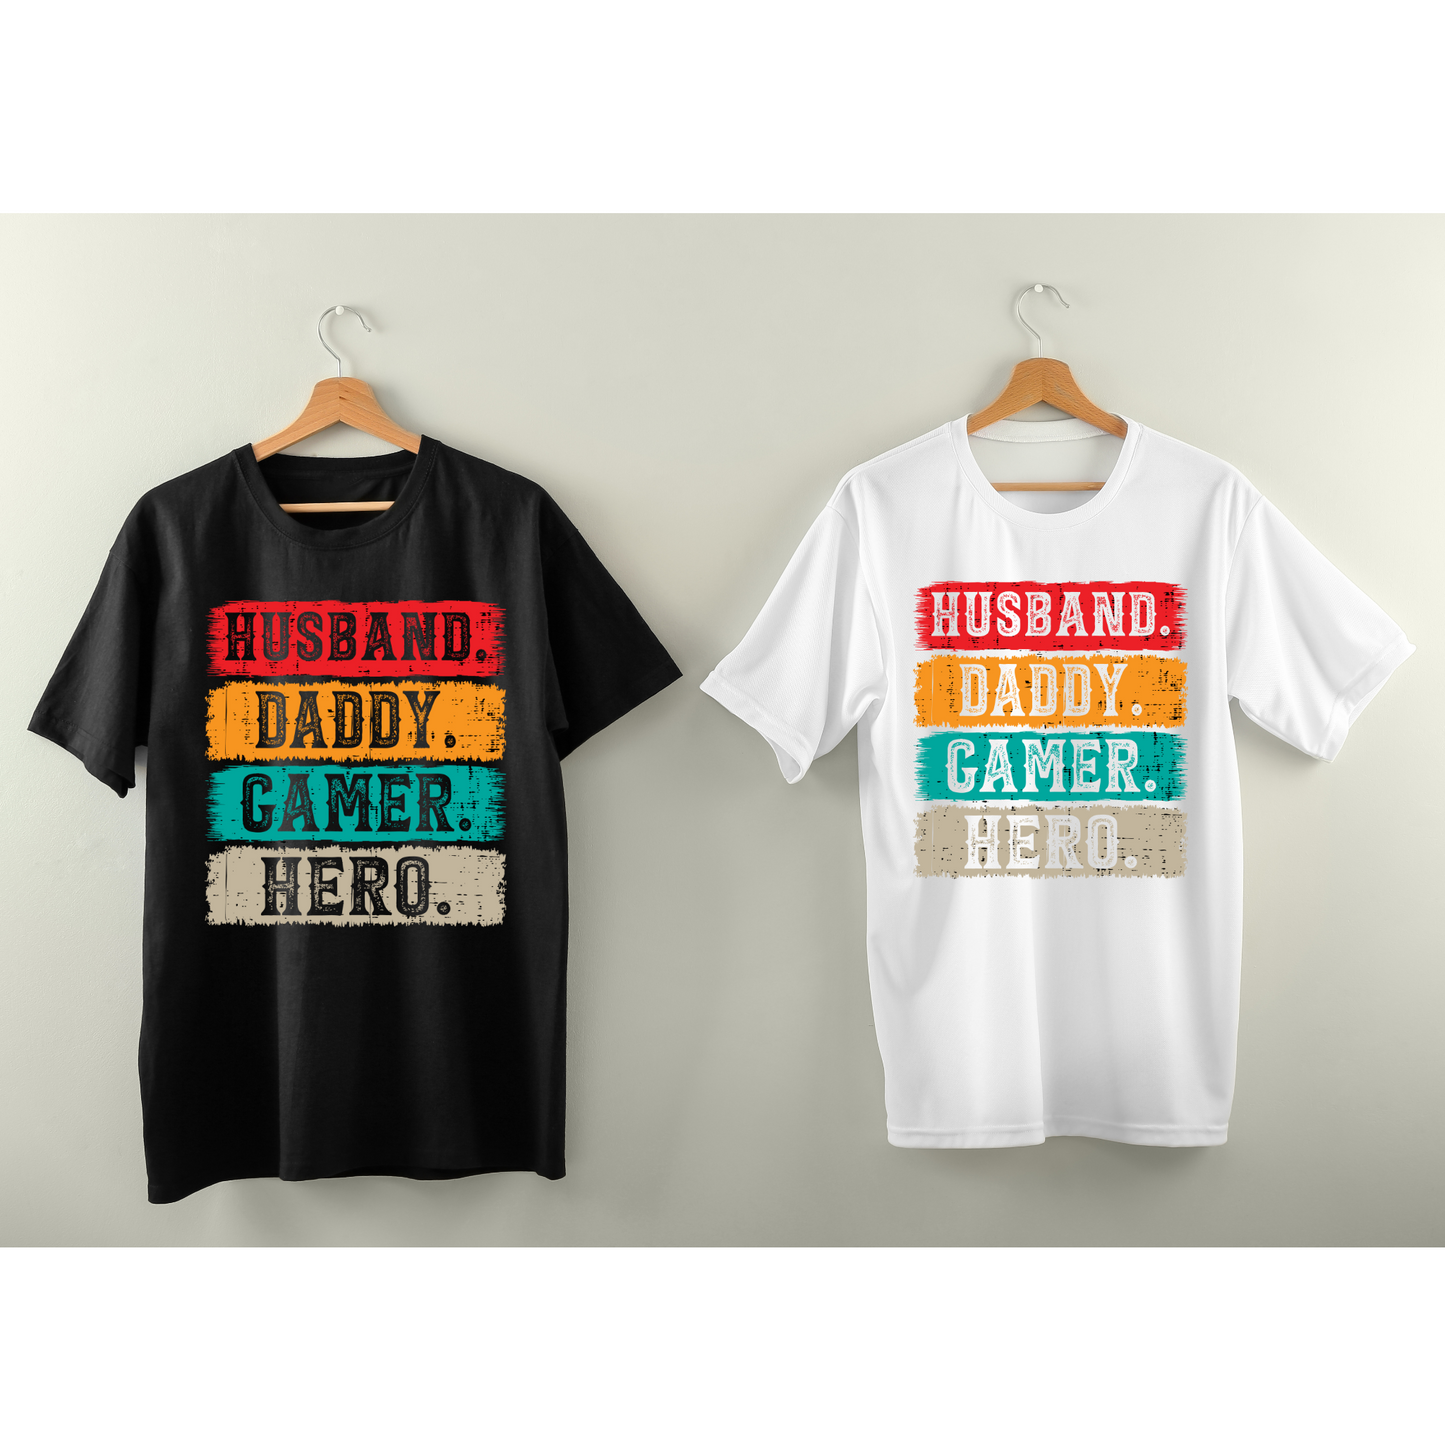 Husband, Daddy, Gamer, Hero: The Ultimate Dad T Shirt